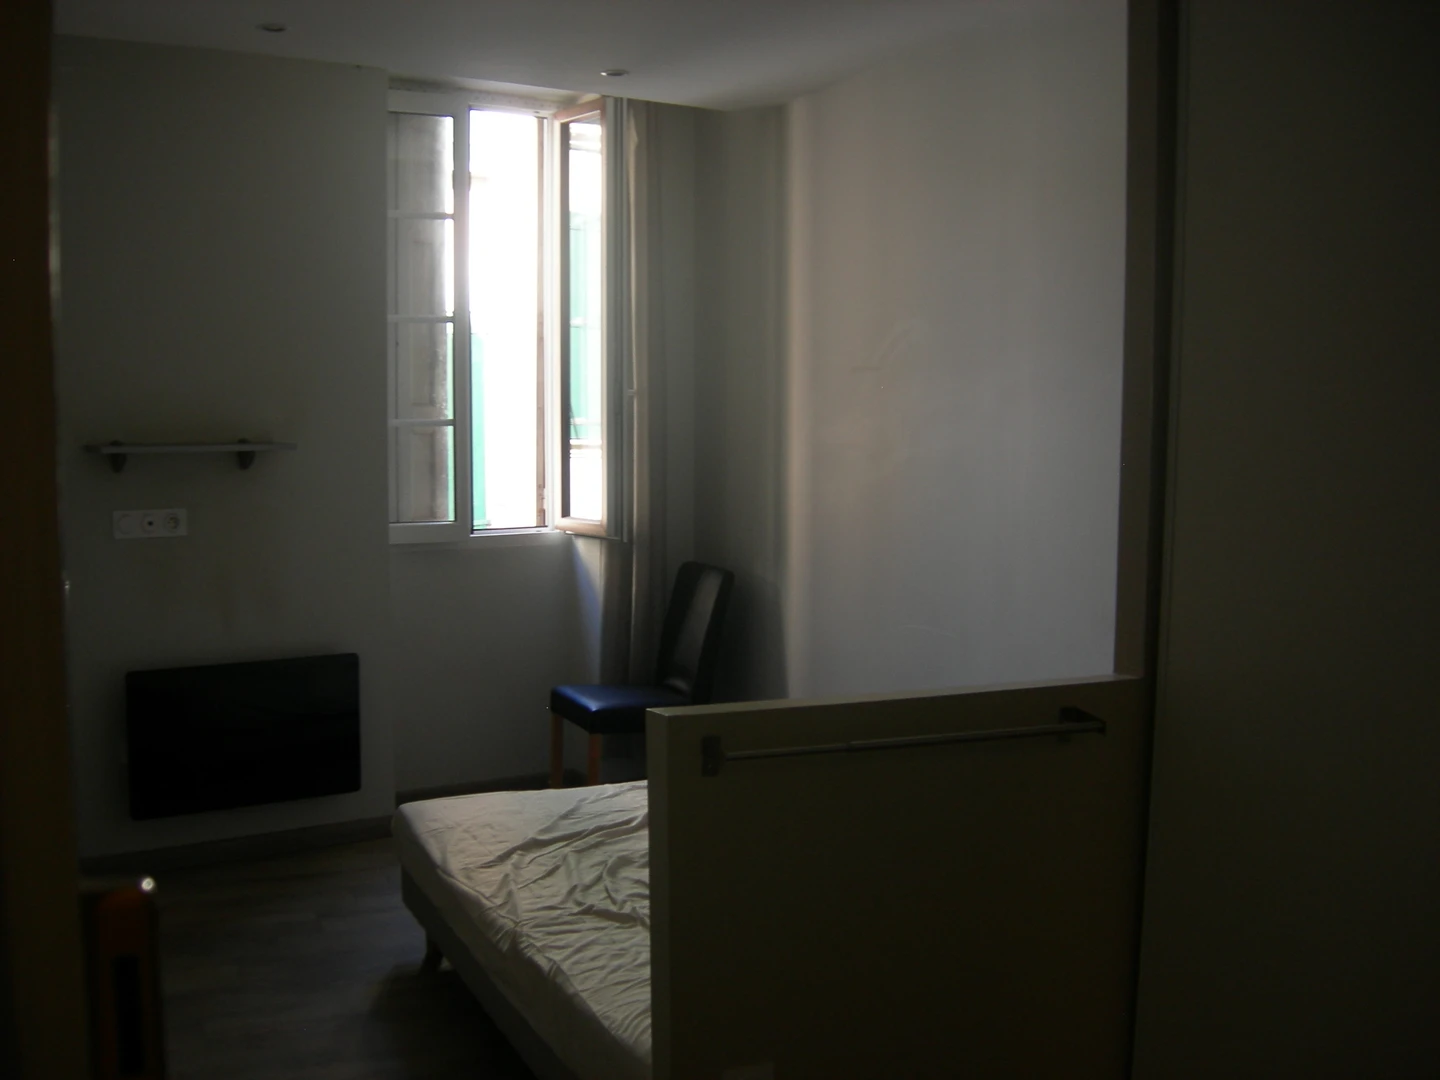 Room for rent in a shared flat in Perpignan